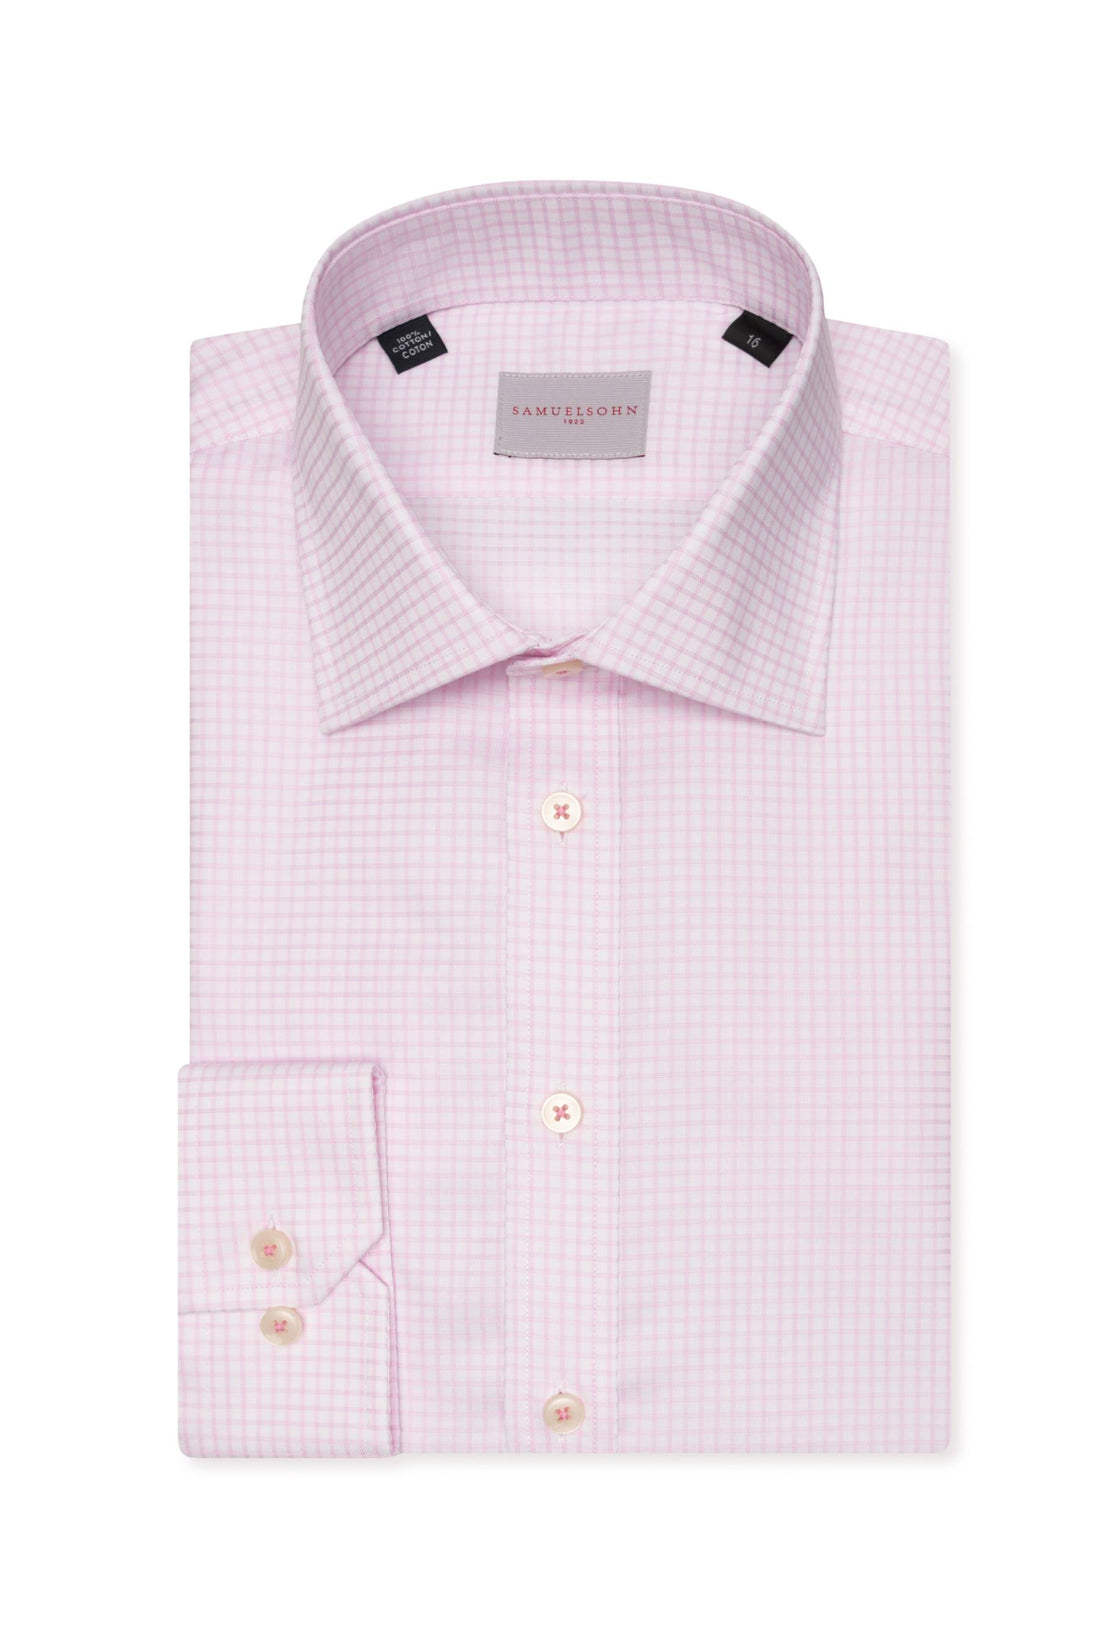 Samuelsohn Pink Twill Check Contemporary Fit Easy Care Shirt